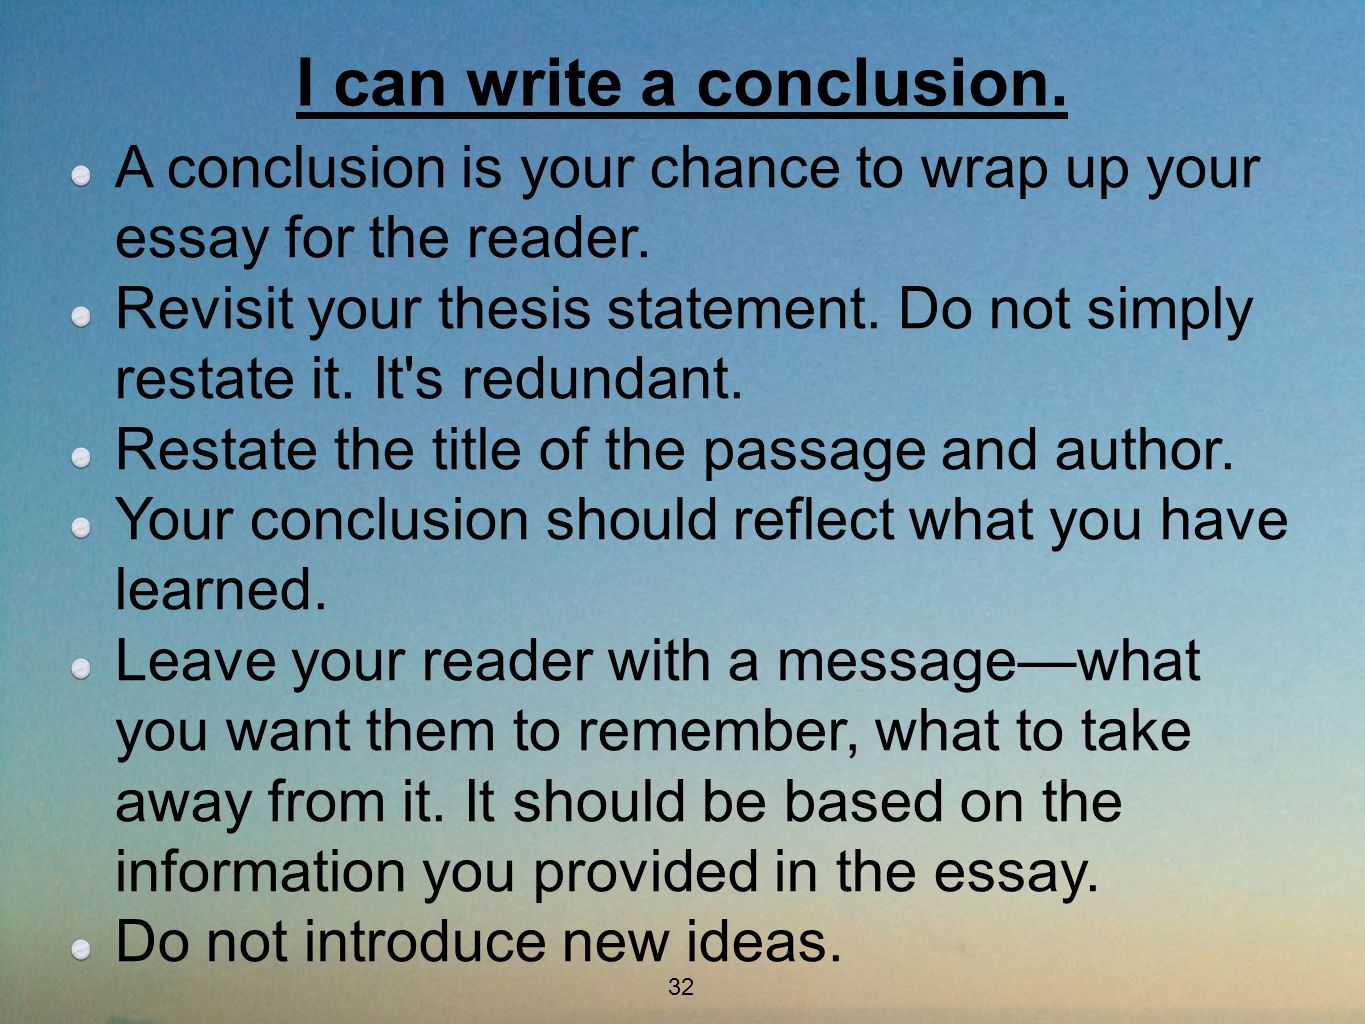 A conclusion is your chance to wrap up your essay for the reader.